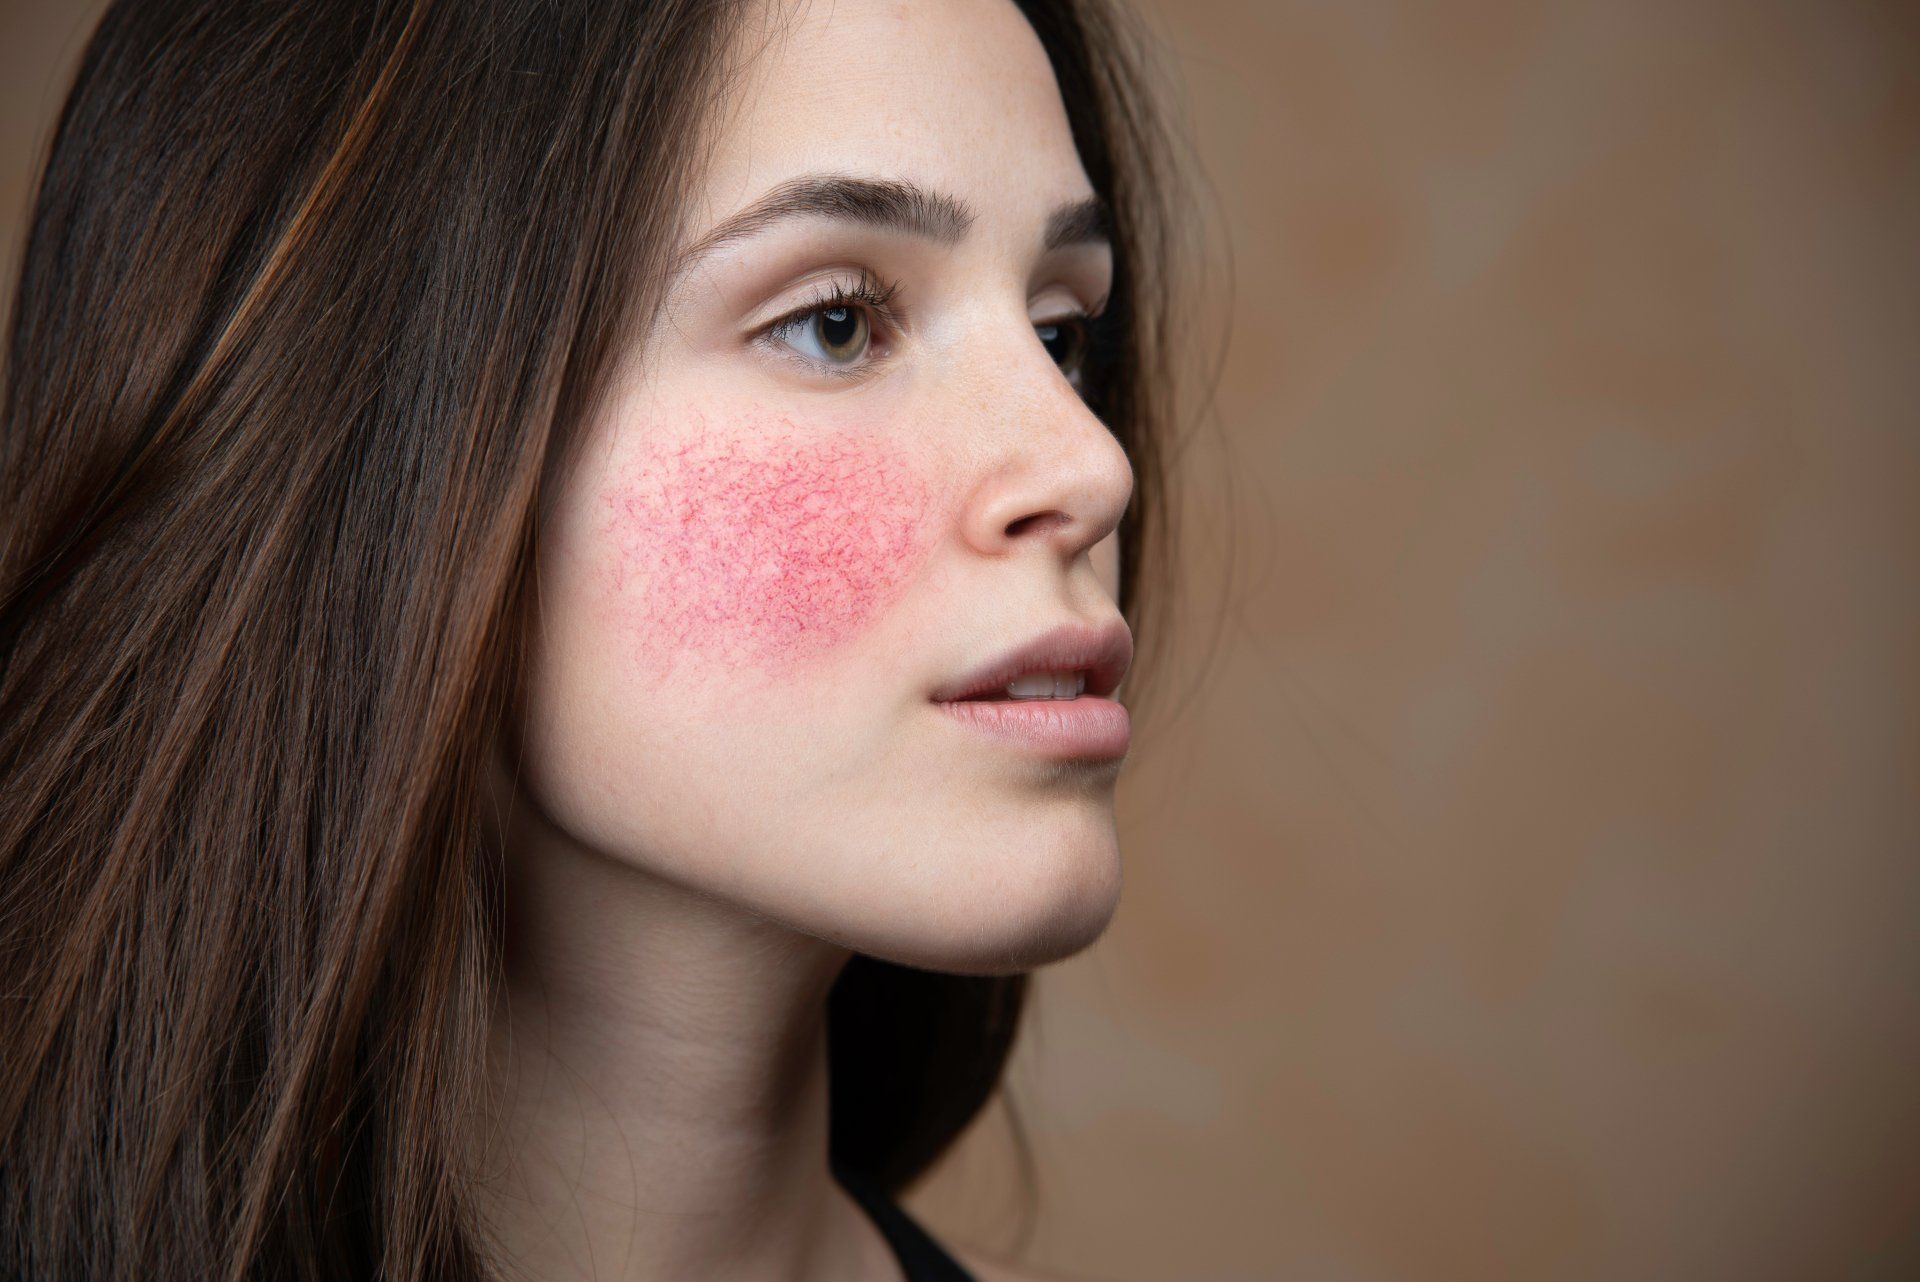 Image of Rosacea + Skin Redness on Woman's Face.